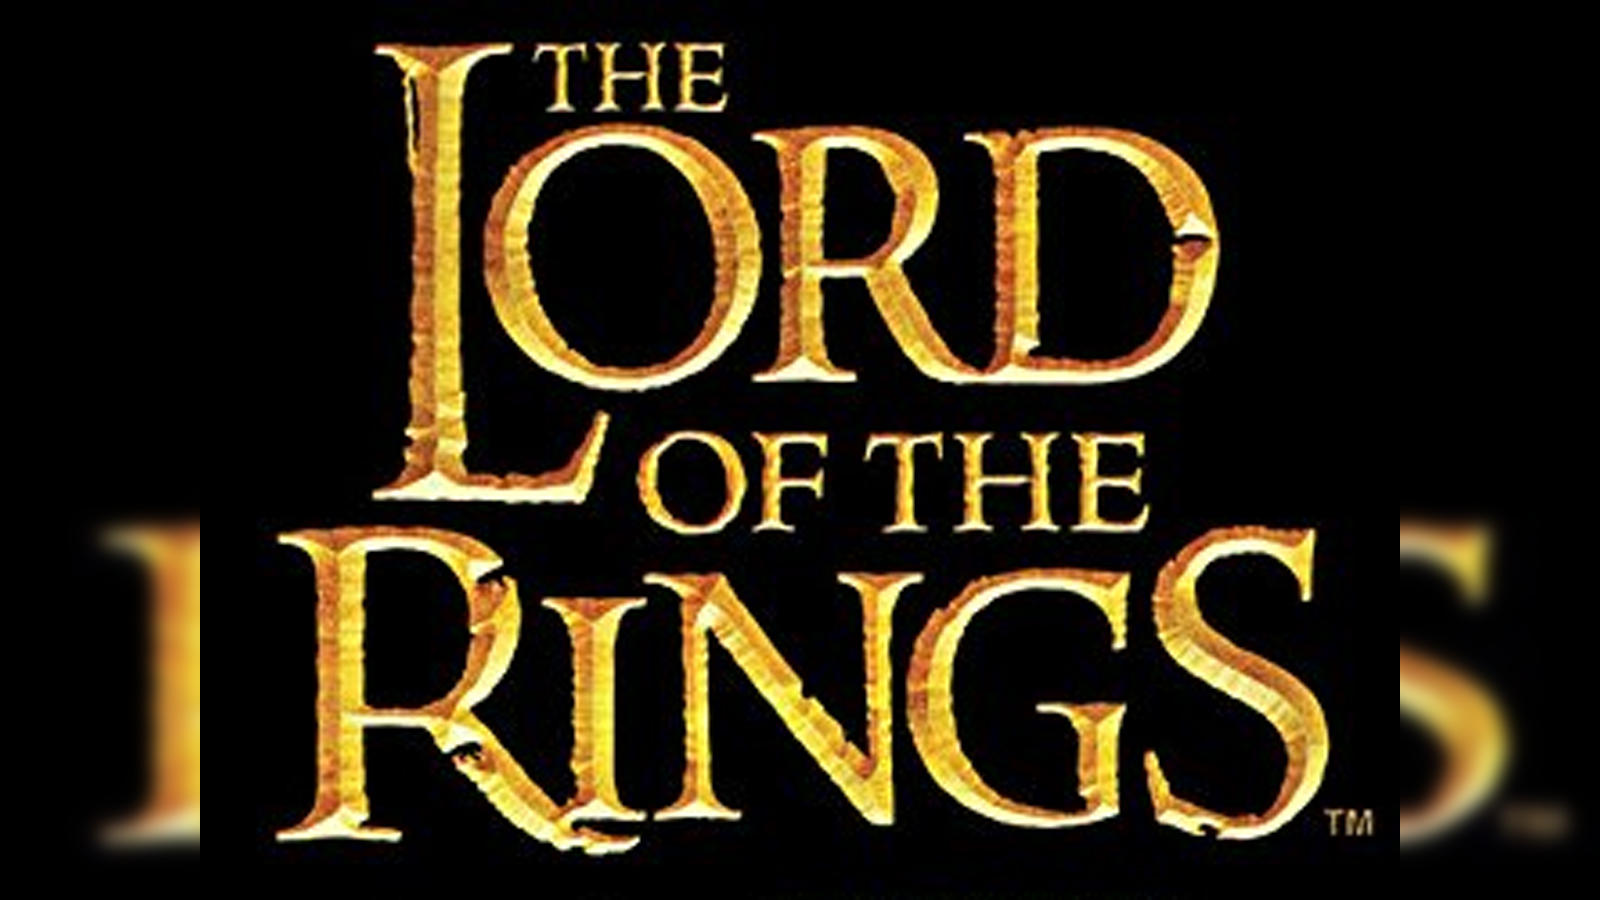 Lord of the Rings' Anime Feature Gets Release Date From Warner Bros.